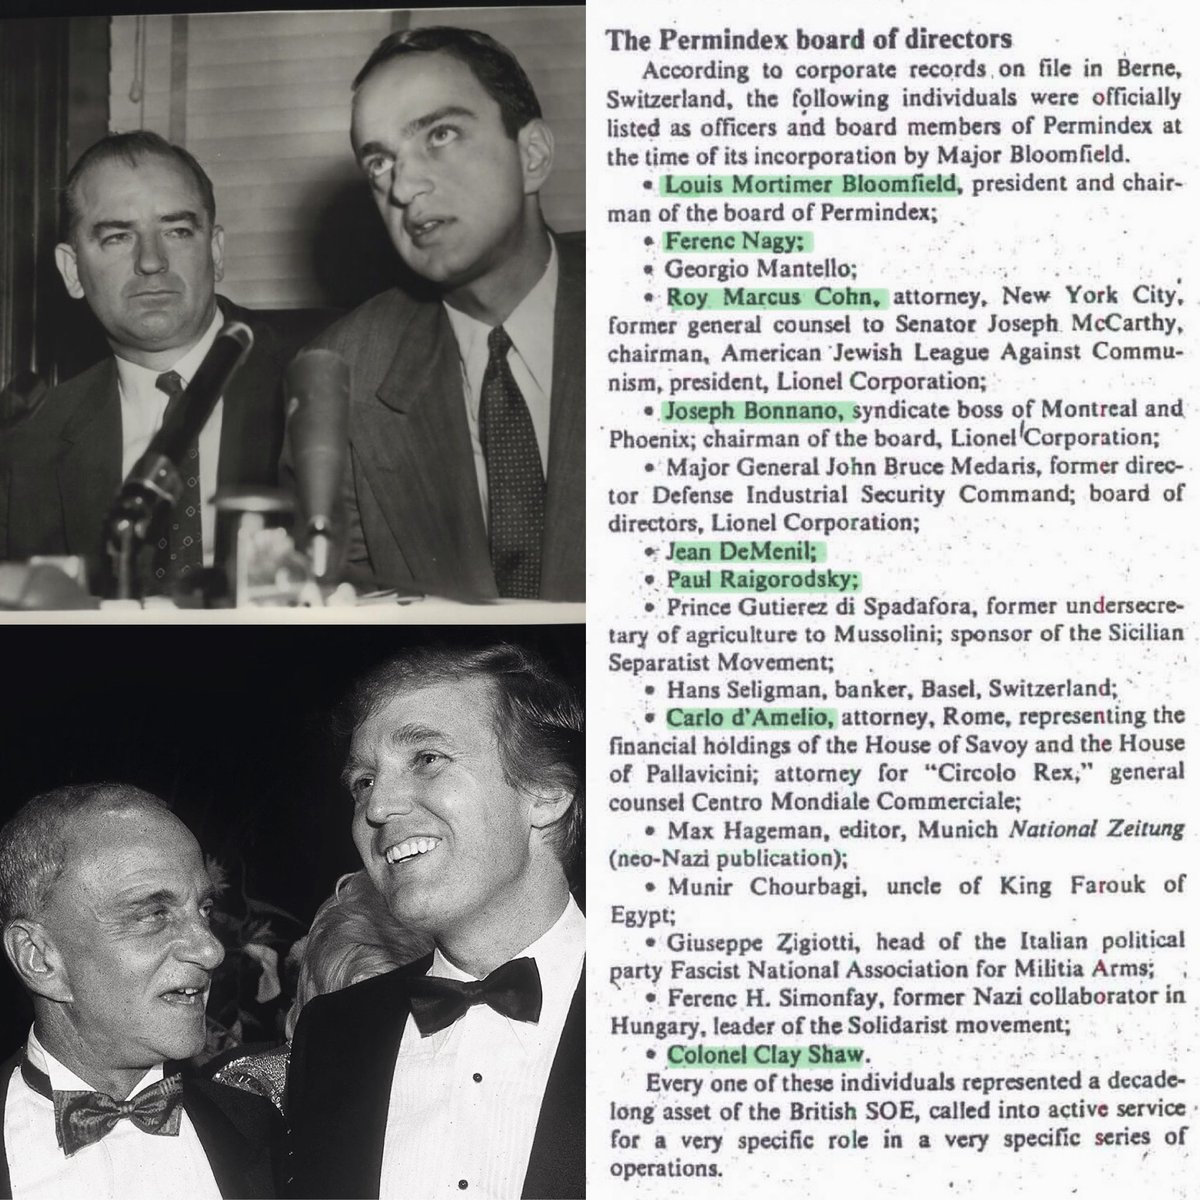 Roy Marcus Cohn, a notoriously harsh lawyer who rose to prominence in the mid-1950s alongside the communist-baiting senator Joseph McCarthy, was on the board of directors of Permindex along with Clay Shaw and others suspected of involvement in the assassination. Cohn later